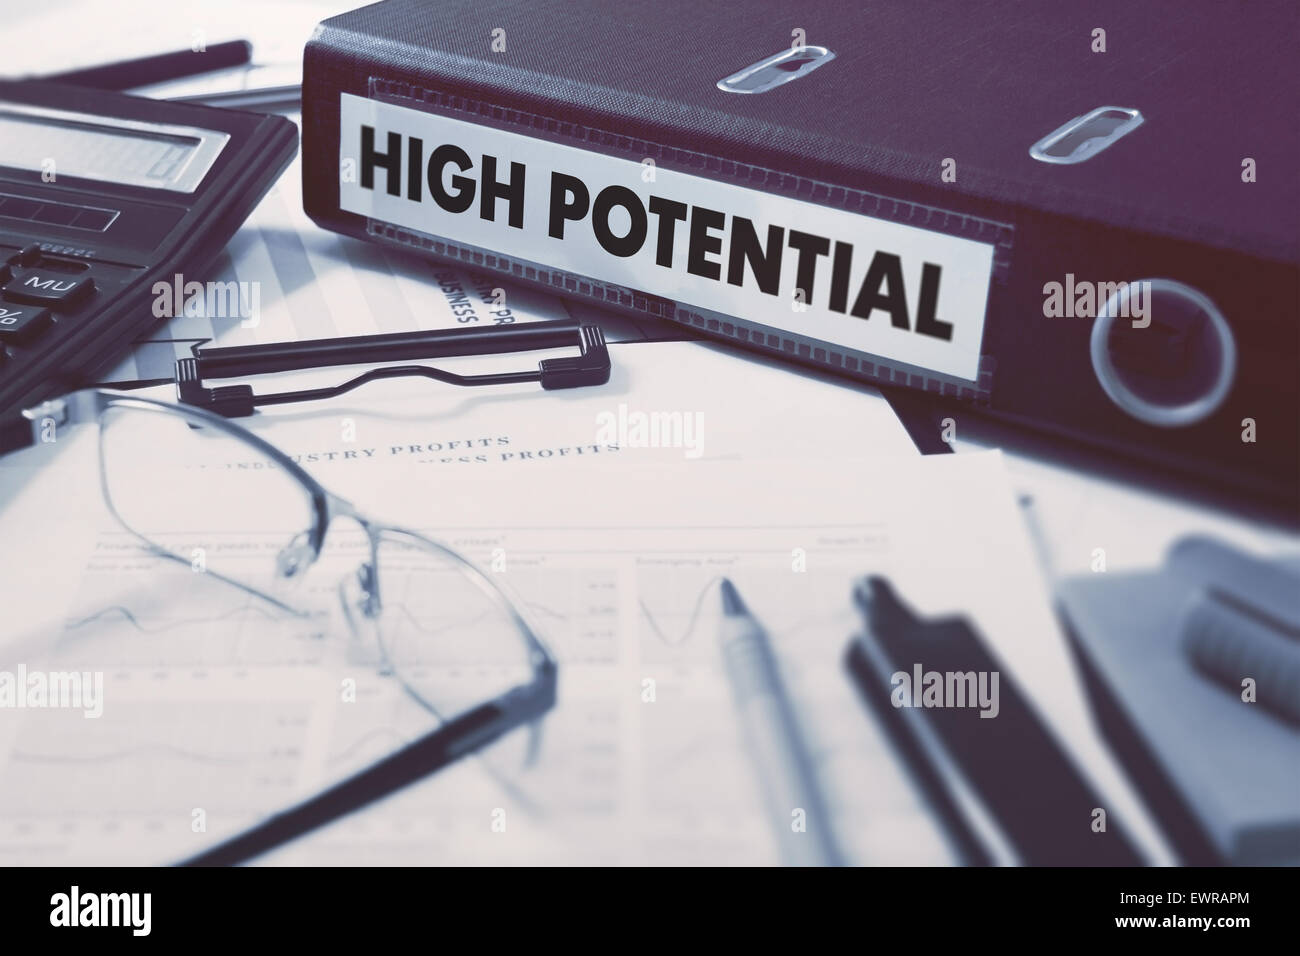 High Potential - Ring Binder on Office Desktop with Office Supplies. Business Concept on Blurred Background. Toned Illustration. Stock Photo